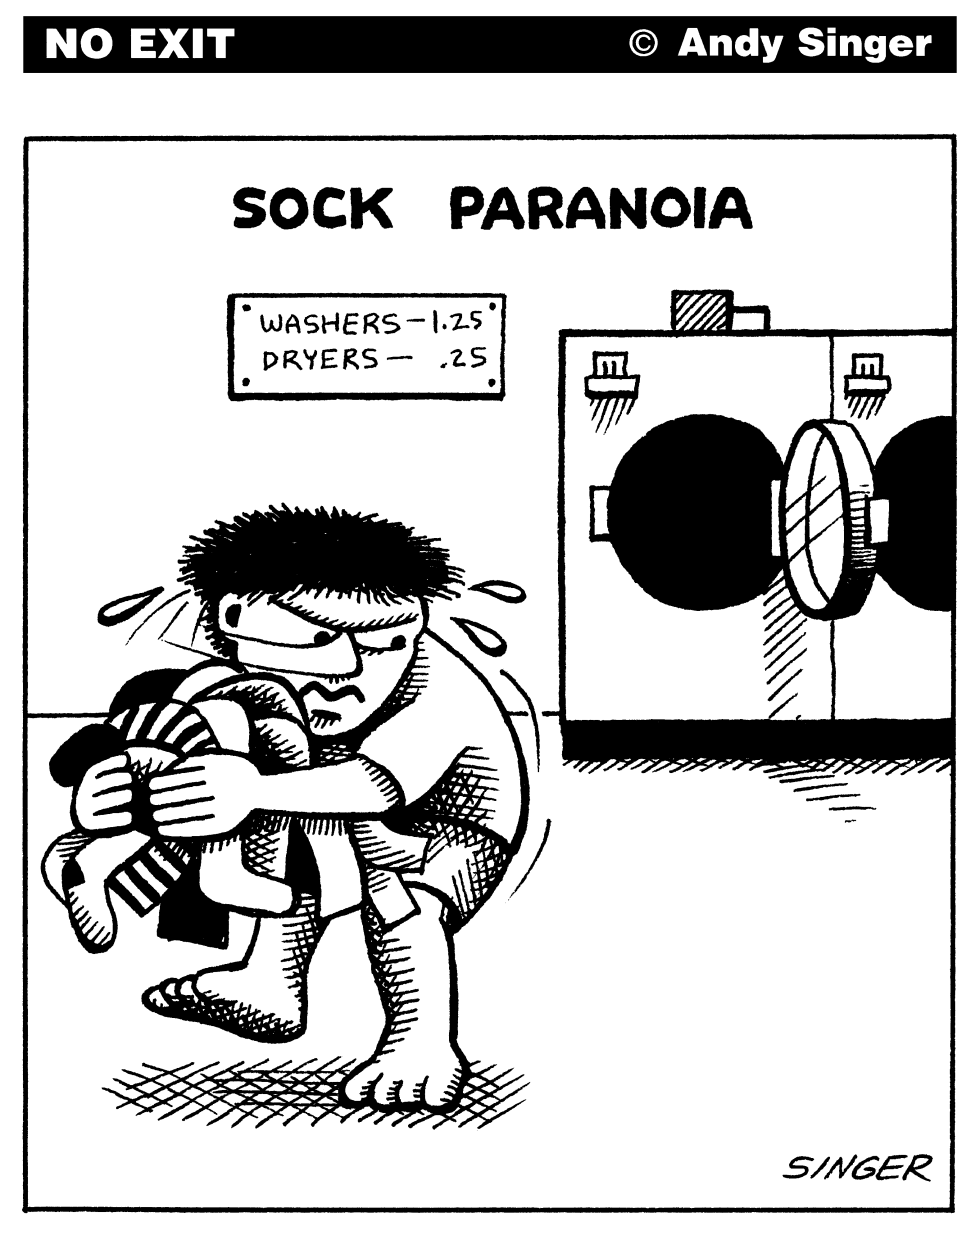 SOCK PARANOIA by Andy Singer